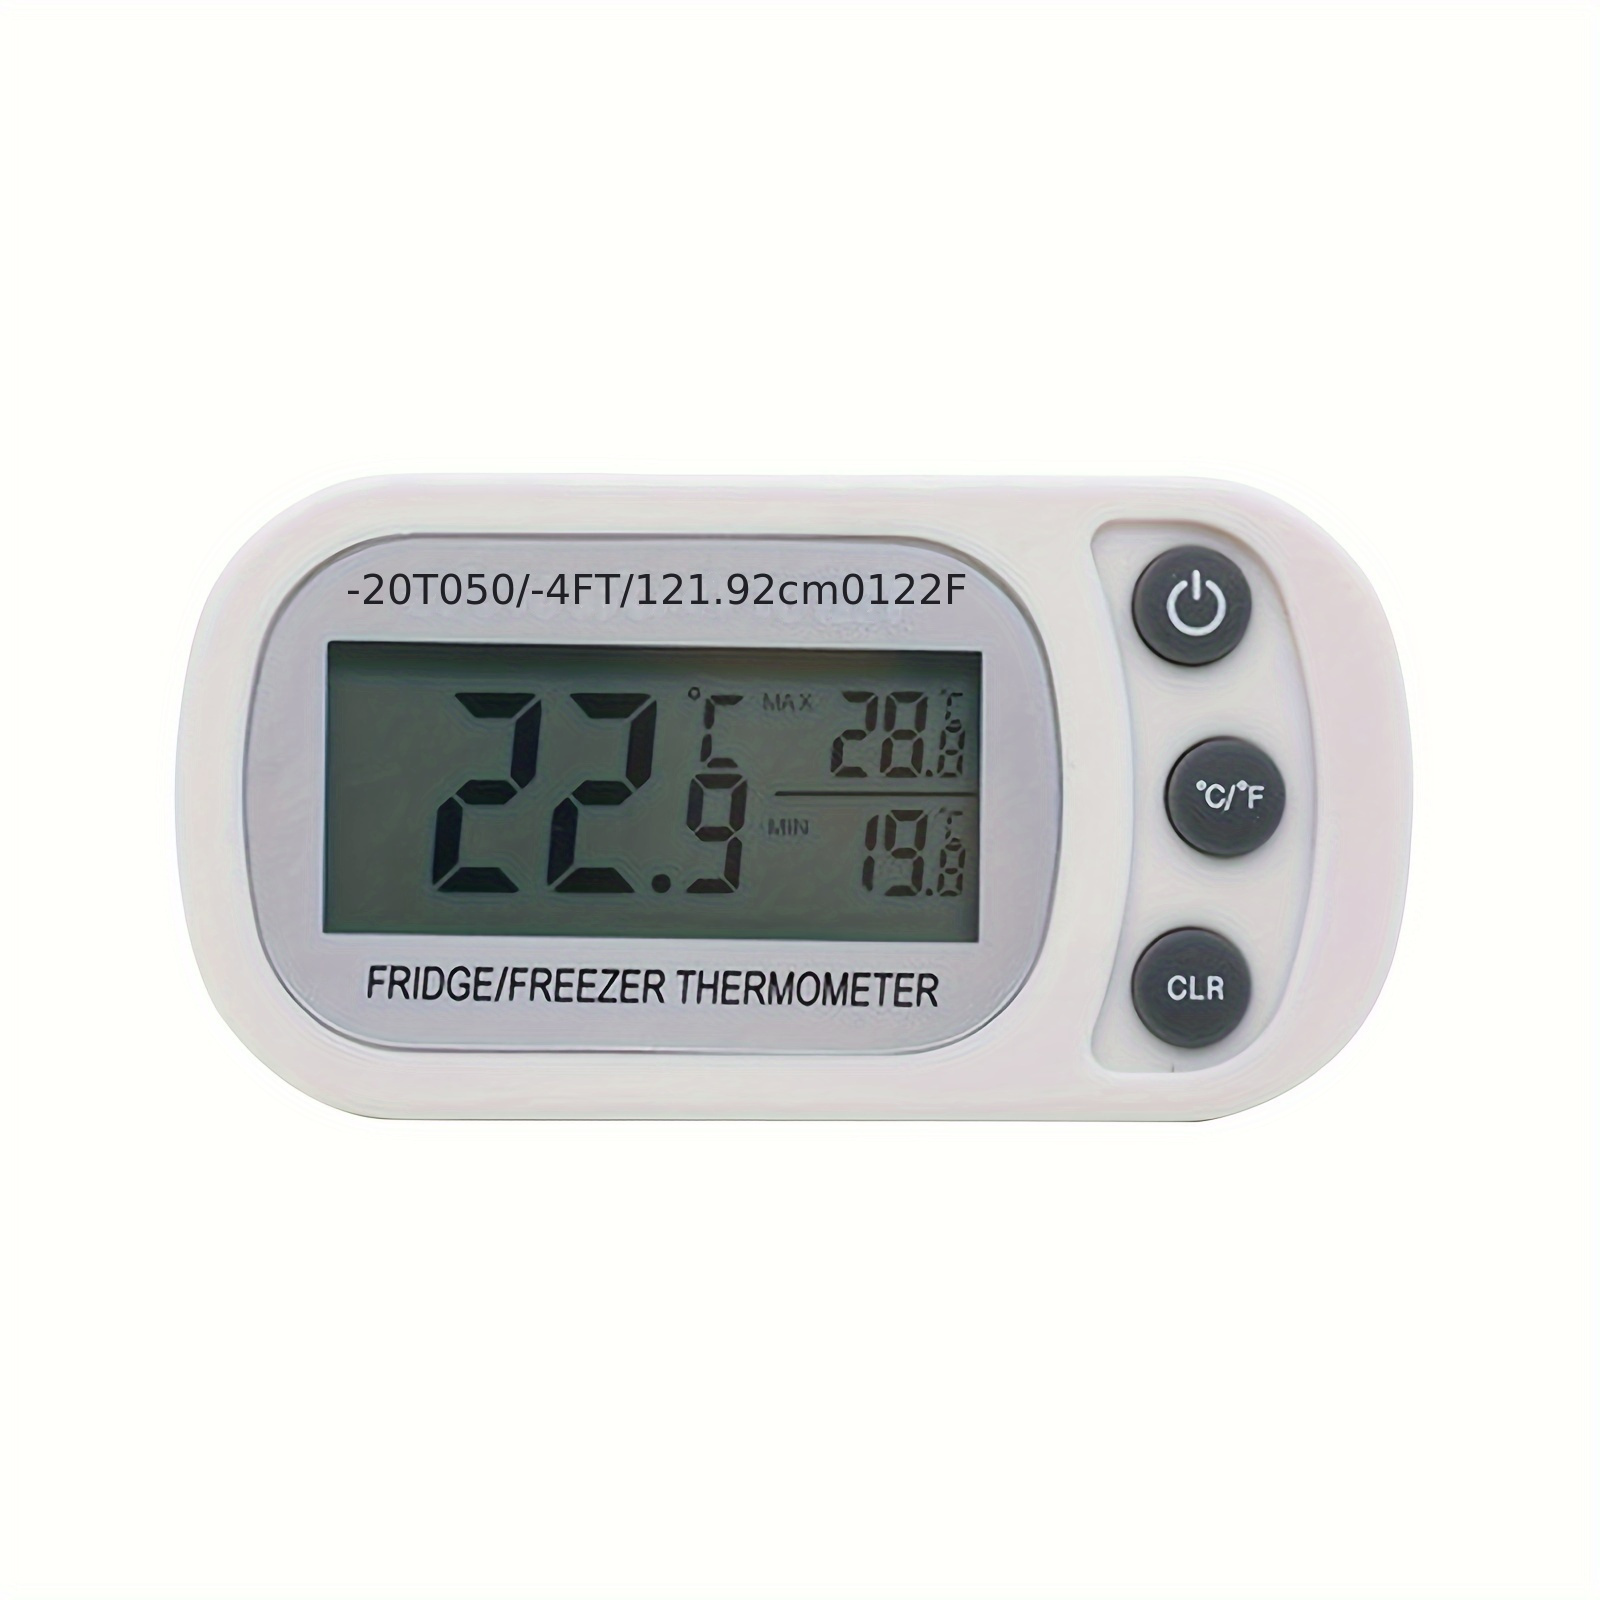 https://img.kwcdn.com/product/refrigerator-thermometers/d69d2f15w98k18-96f8c09e/fancyalgo/toaster-api/toaster-processor-image-cm2in/34e778ca-8dd2-11ee-87d9-0a580a6810bb.jpg?imageView2/2/w/500/q/60/format/webp